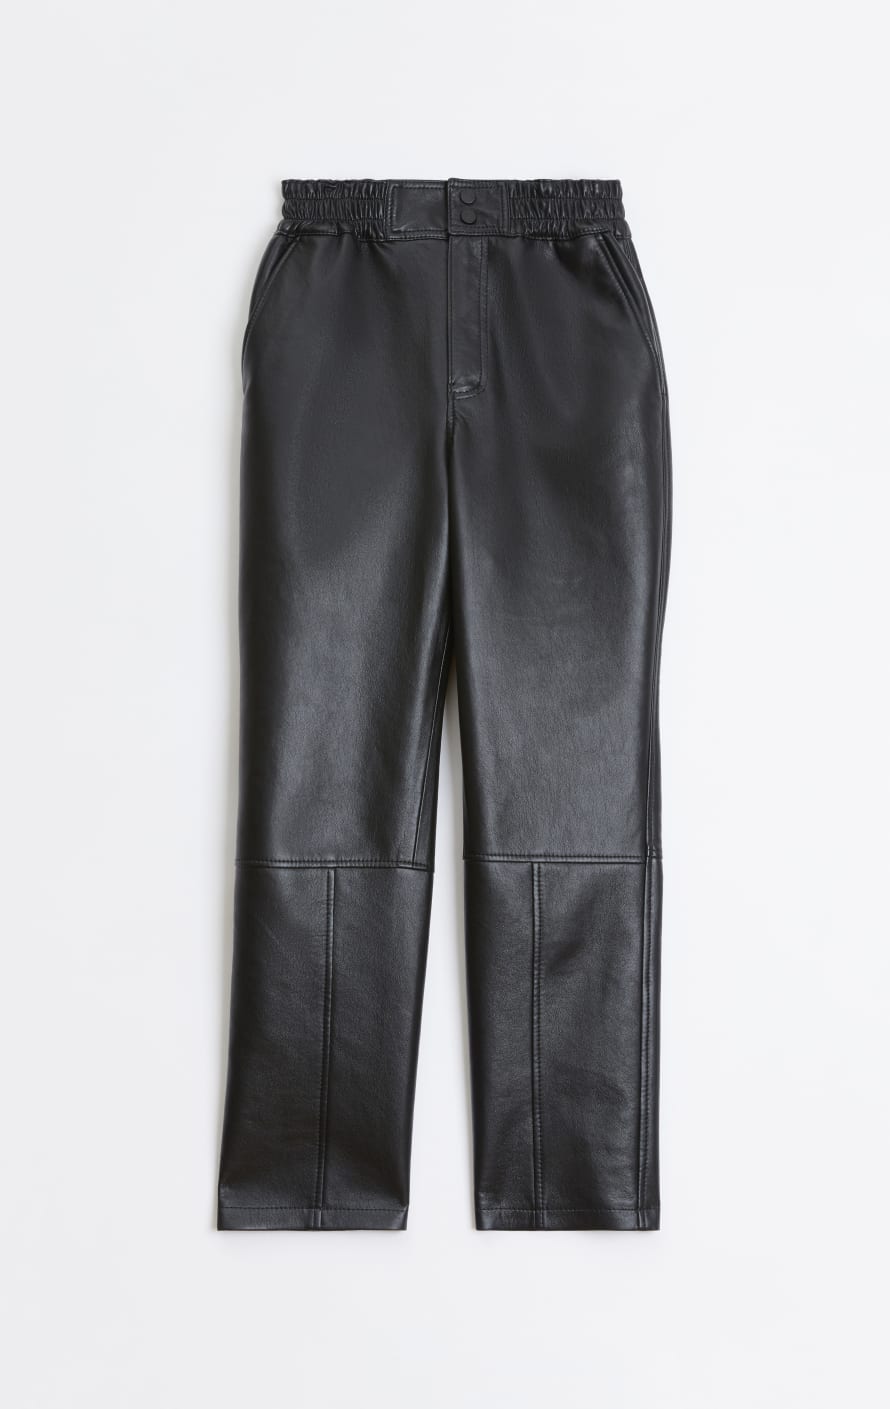 Rodebjer Satine Recycled Leather Pants